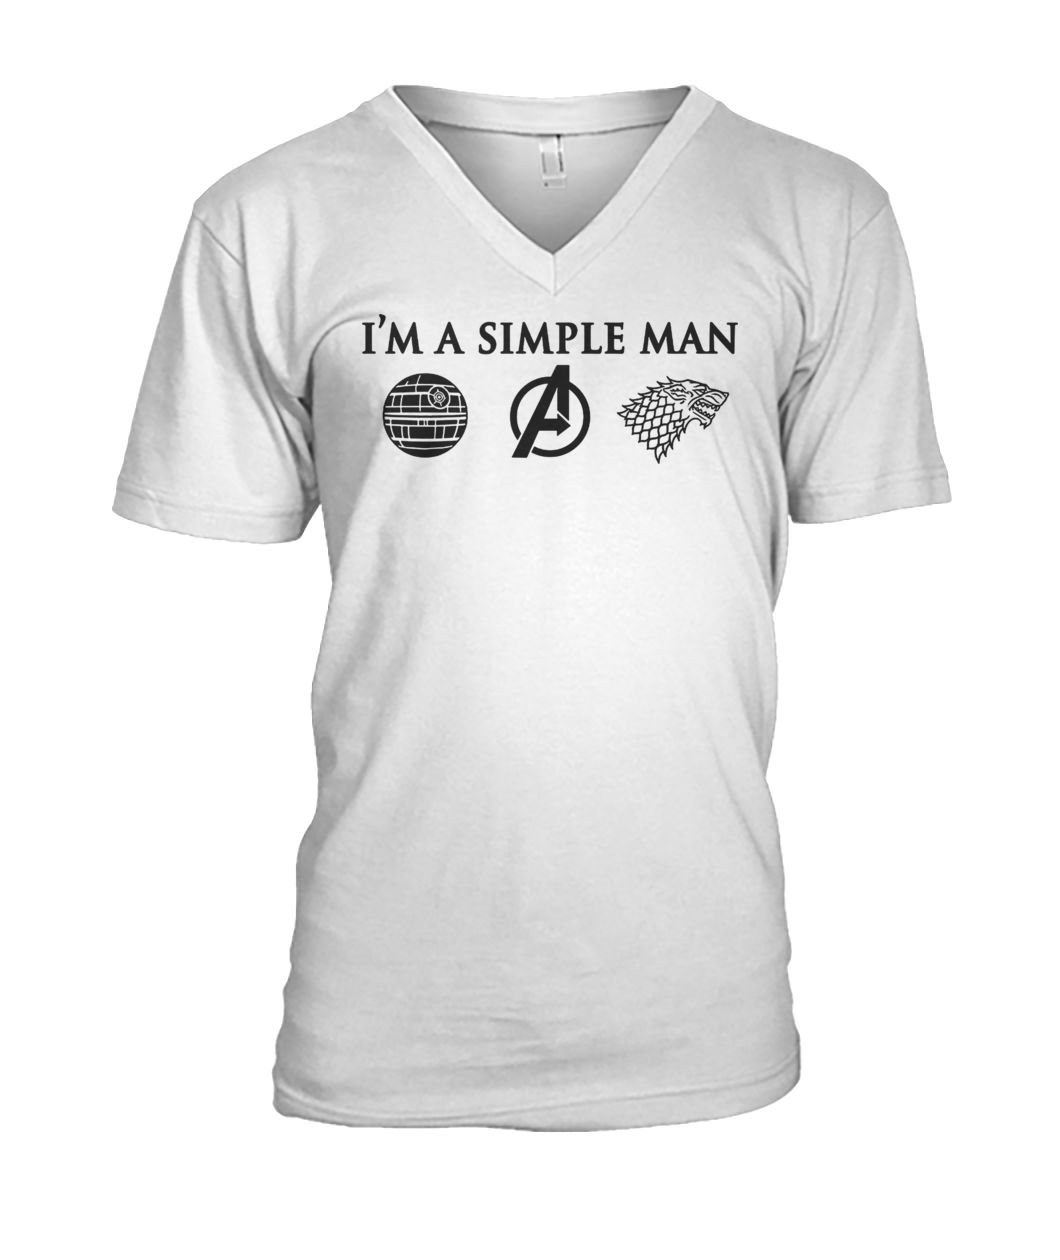 I'm a simple man I love death star star wars avengers and game of thrones mens v-neck